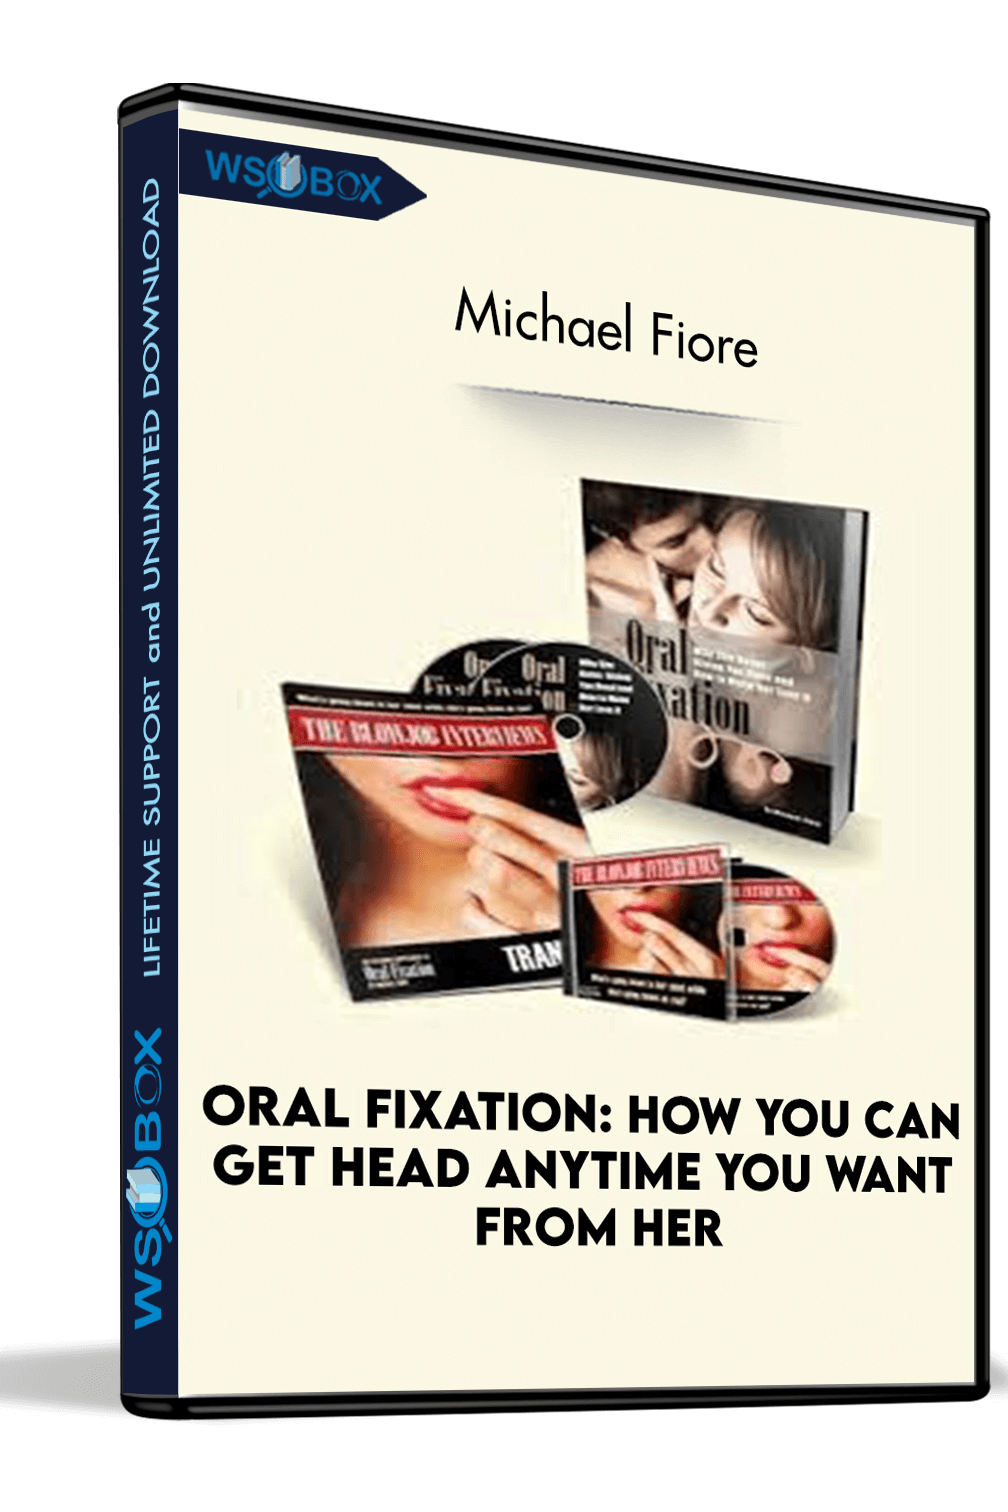 oral-fixation-how-you-can-get-head-anytime-you-want-from-her-michael-fiore